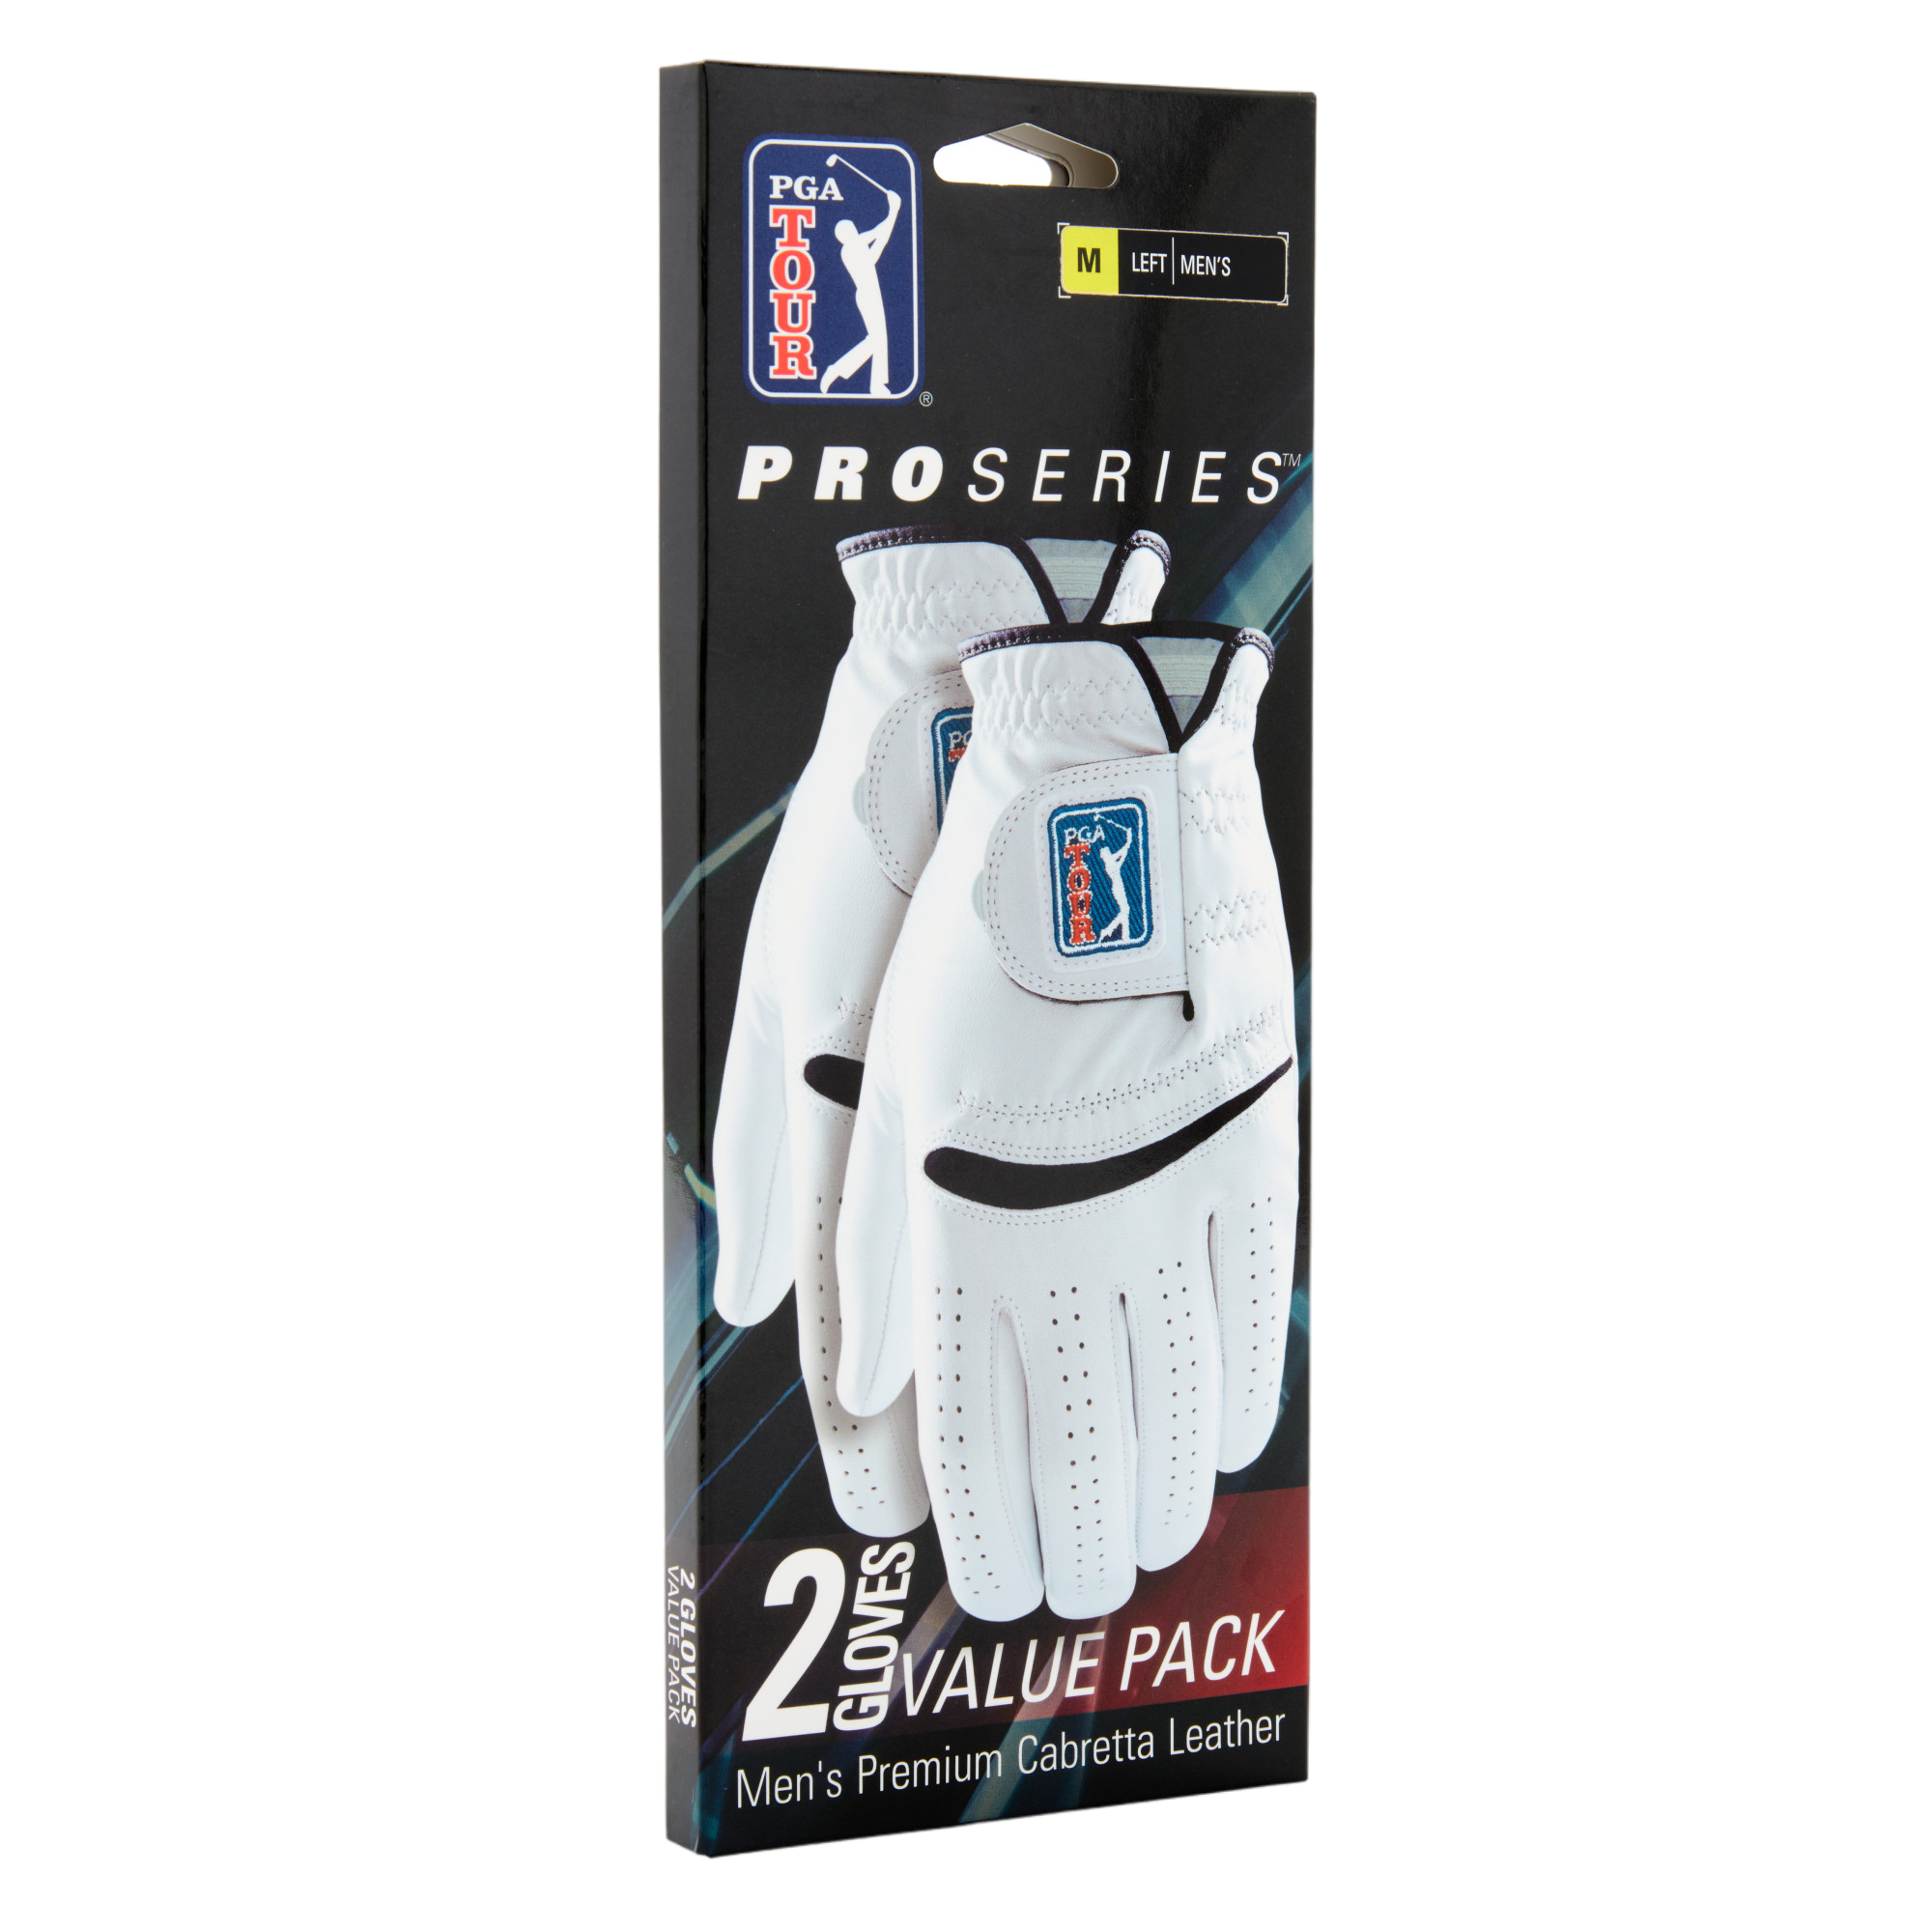 Men's Pro Series Leather Glove (2-Pack)